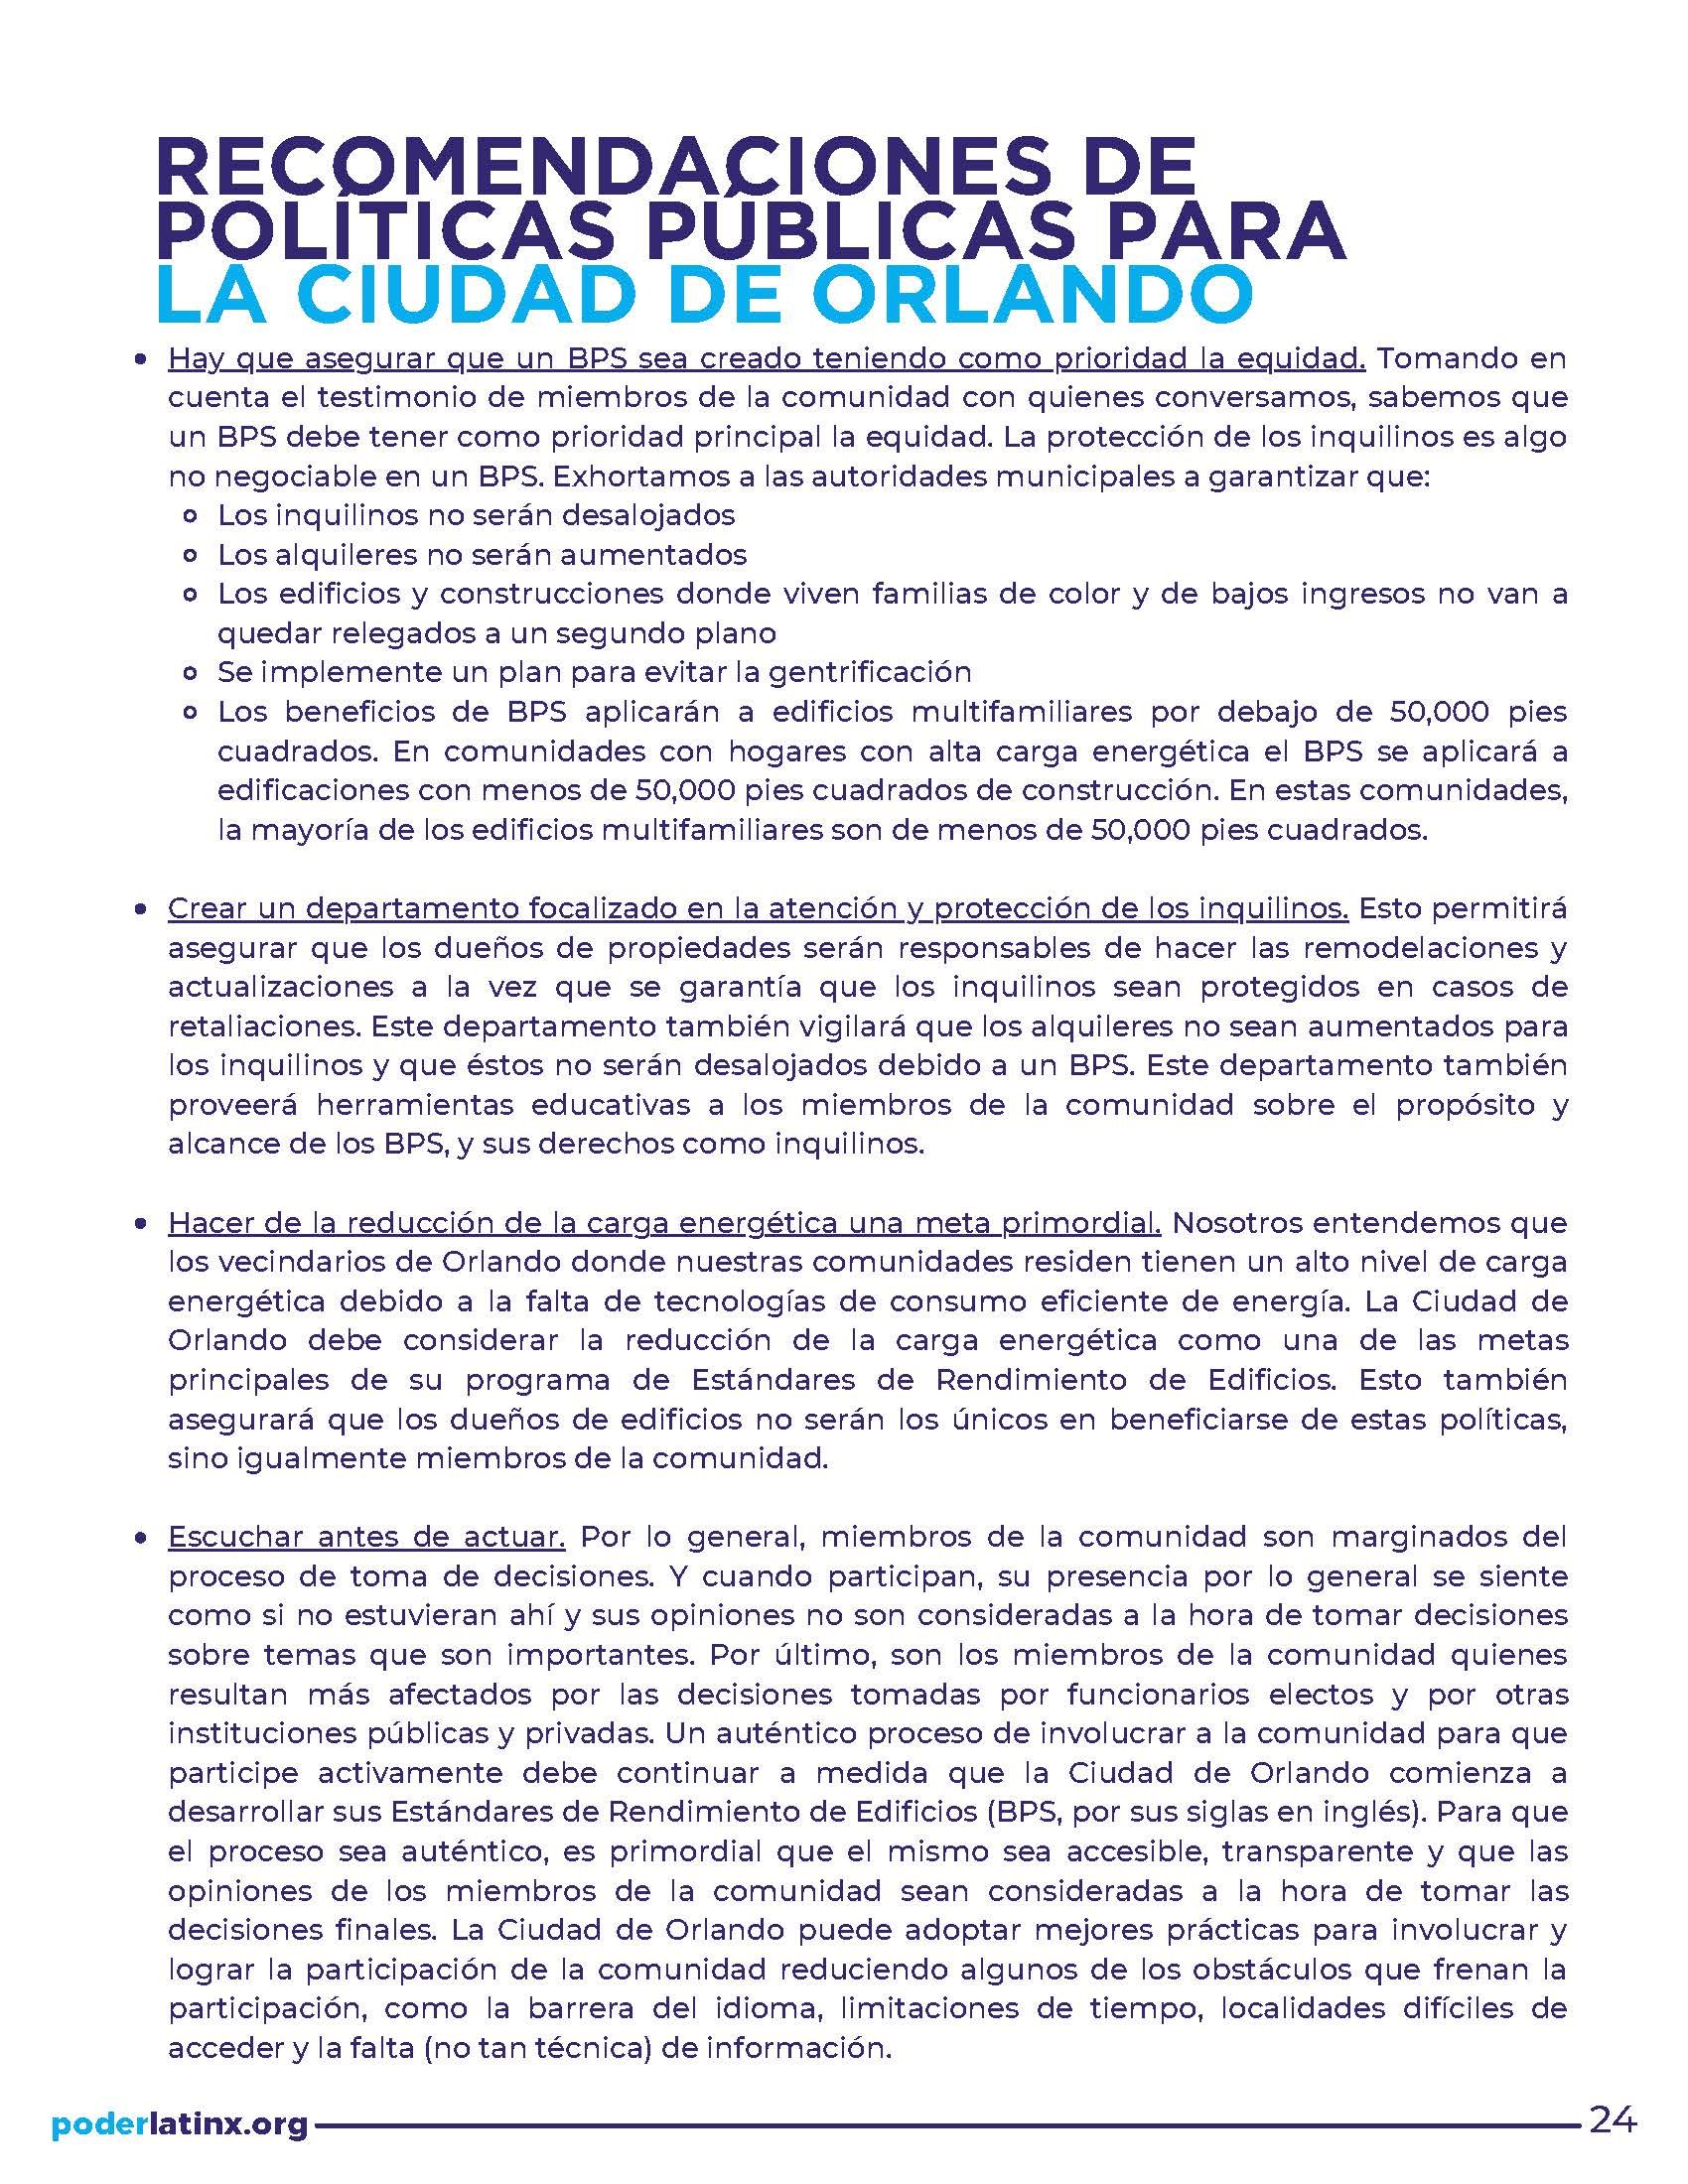 IMT Report - Spanish_Page_24.jpg